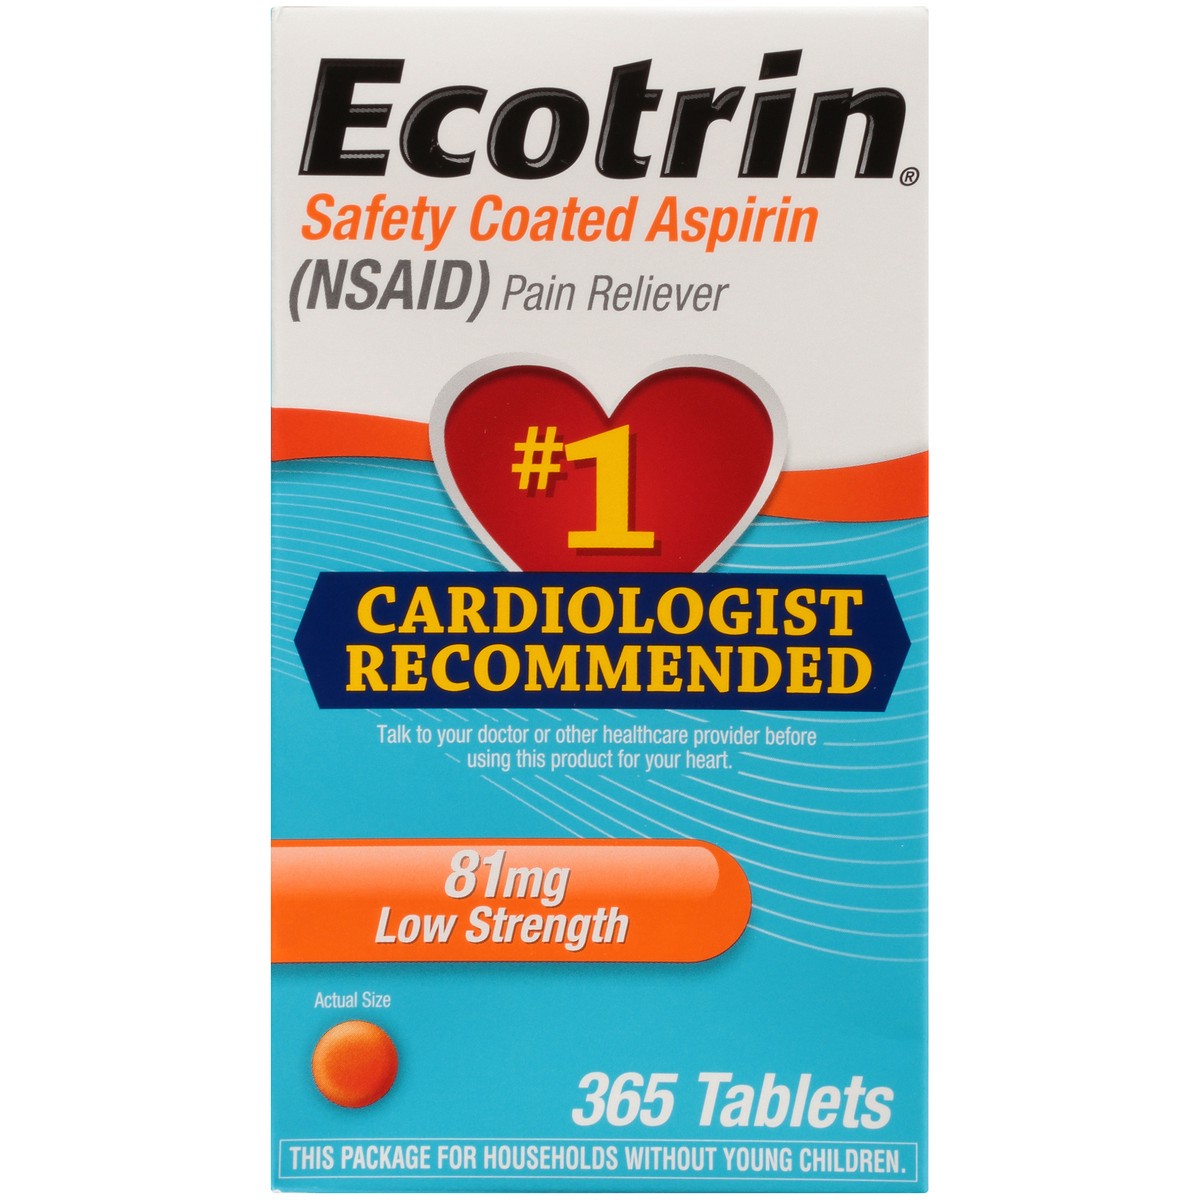 slide 10 of 10, Ecotrin Low Strength Safety Coated Aspirin, NSAID, 81mg, 365 Tablets, 365 pk